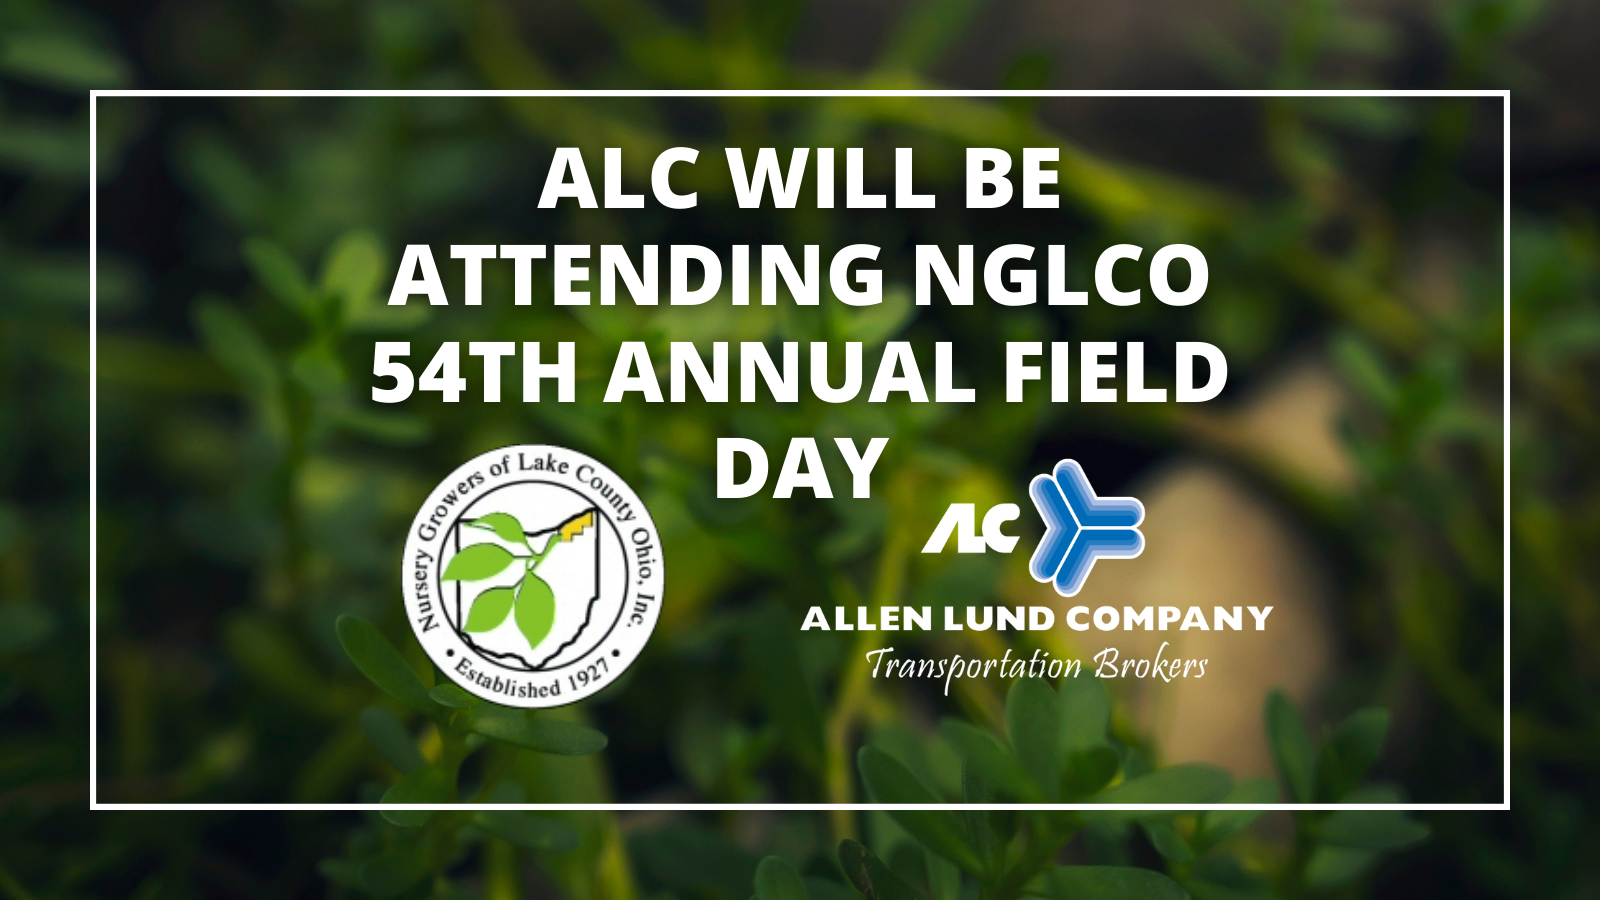 ALC will be attending NGLCO 54th Annual Field Day